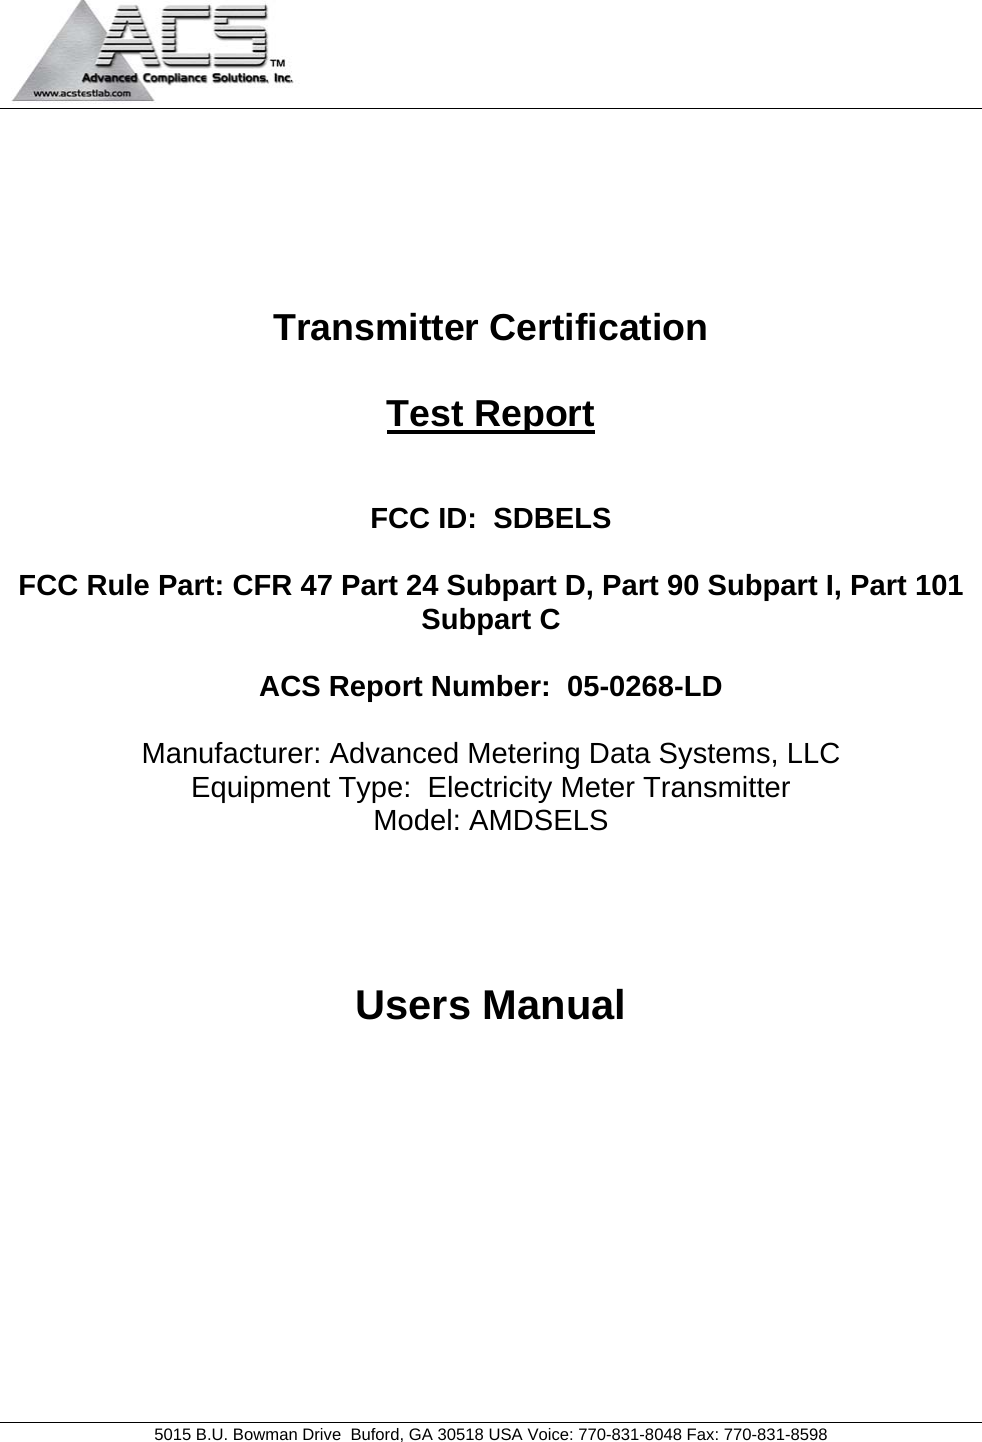                                            5015 B.U. Bowman Drive  Buford, GA 30518 USA Voice: 770-831-8048 Fax: 770-831-8598       Transmitter Certification  Test Report   FCC ID:  SDBELS  FCC Rule Part: CFR 47 Part 24 Subpart D, Part 90 Subpart I, Part 101 Subpart C  ACS Report Number:  05-0268-LD   Manufacturer: Advanced Metering Data Systems, LLC Equipment Type:  Electricity Meter Transmitter Model: AMDSELS     Users Manual 